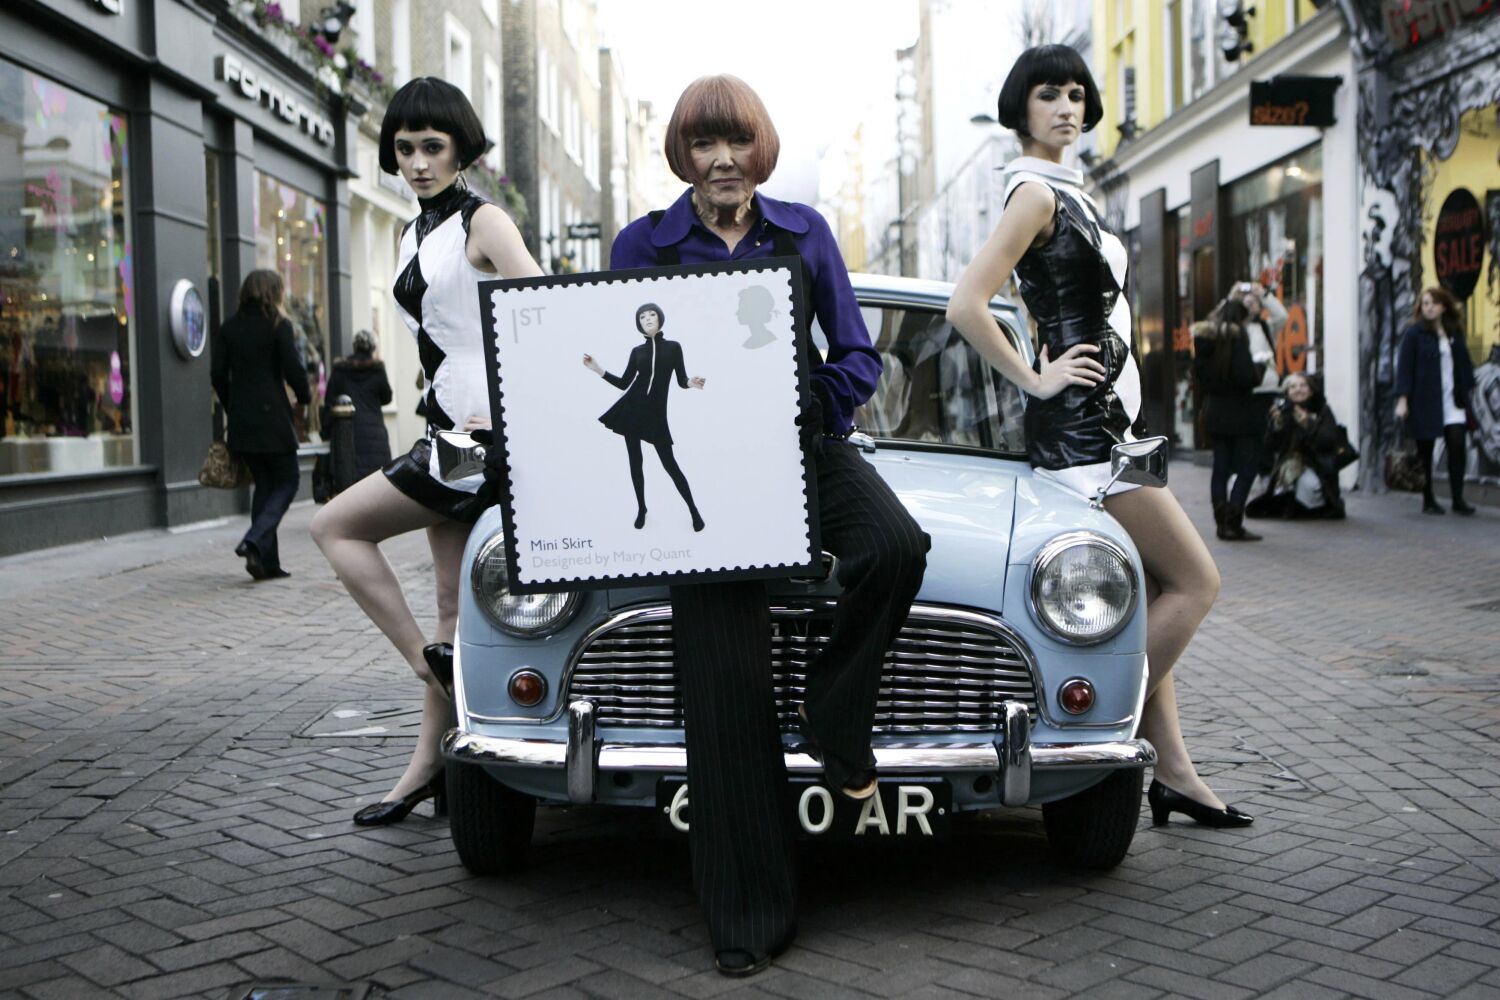 Mary Quant, fashion designer who dressed up the Swinging '60s, dies at 93